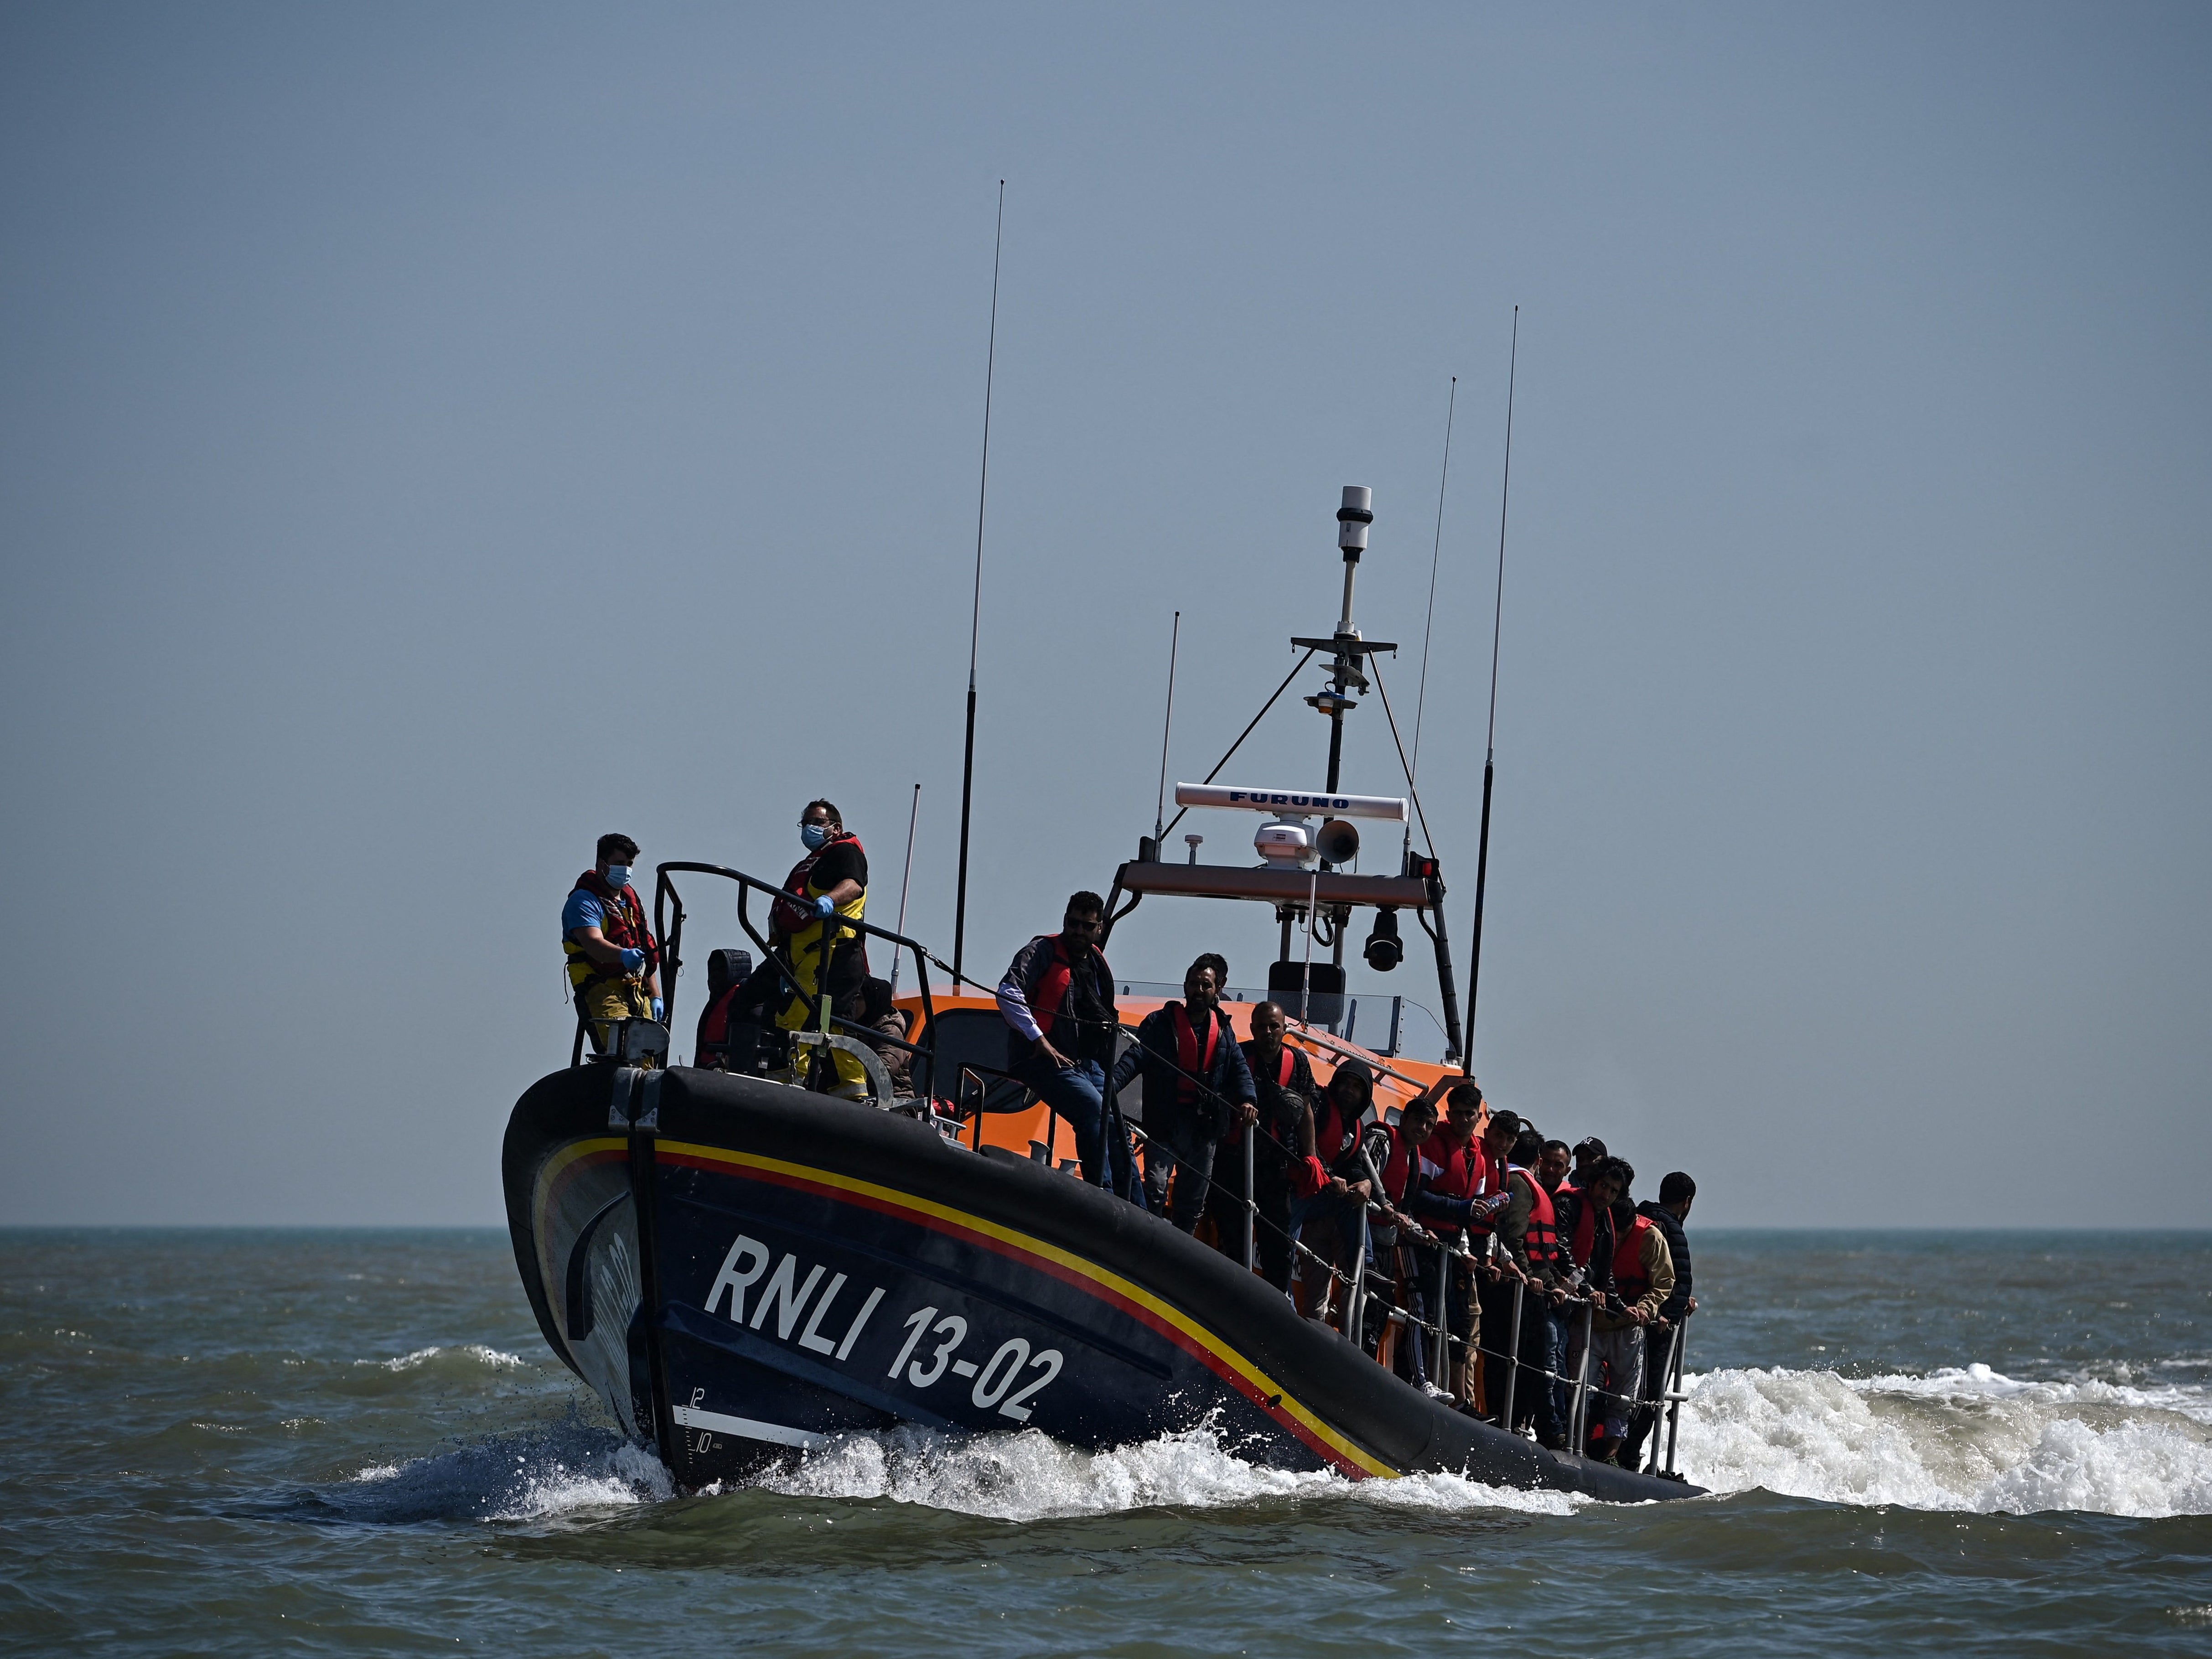 Government figures show 40,000 have crossed the English Channel on small boats this year so far